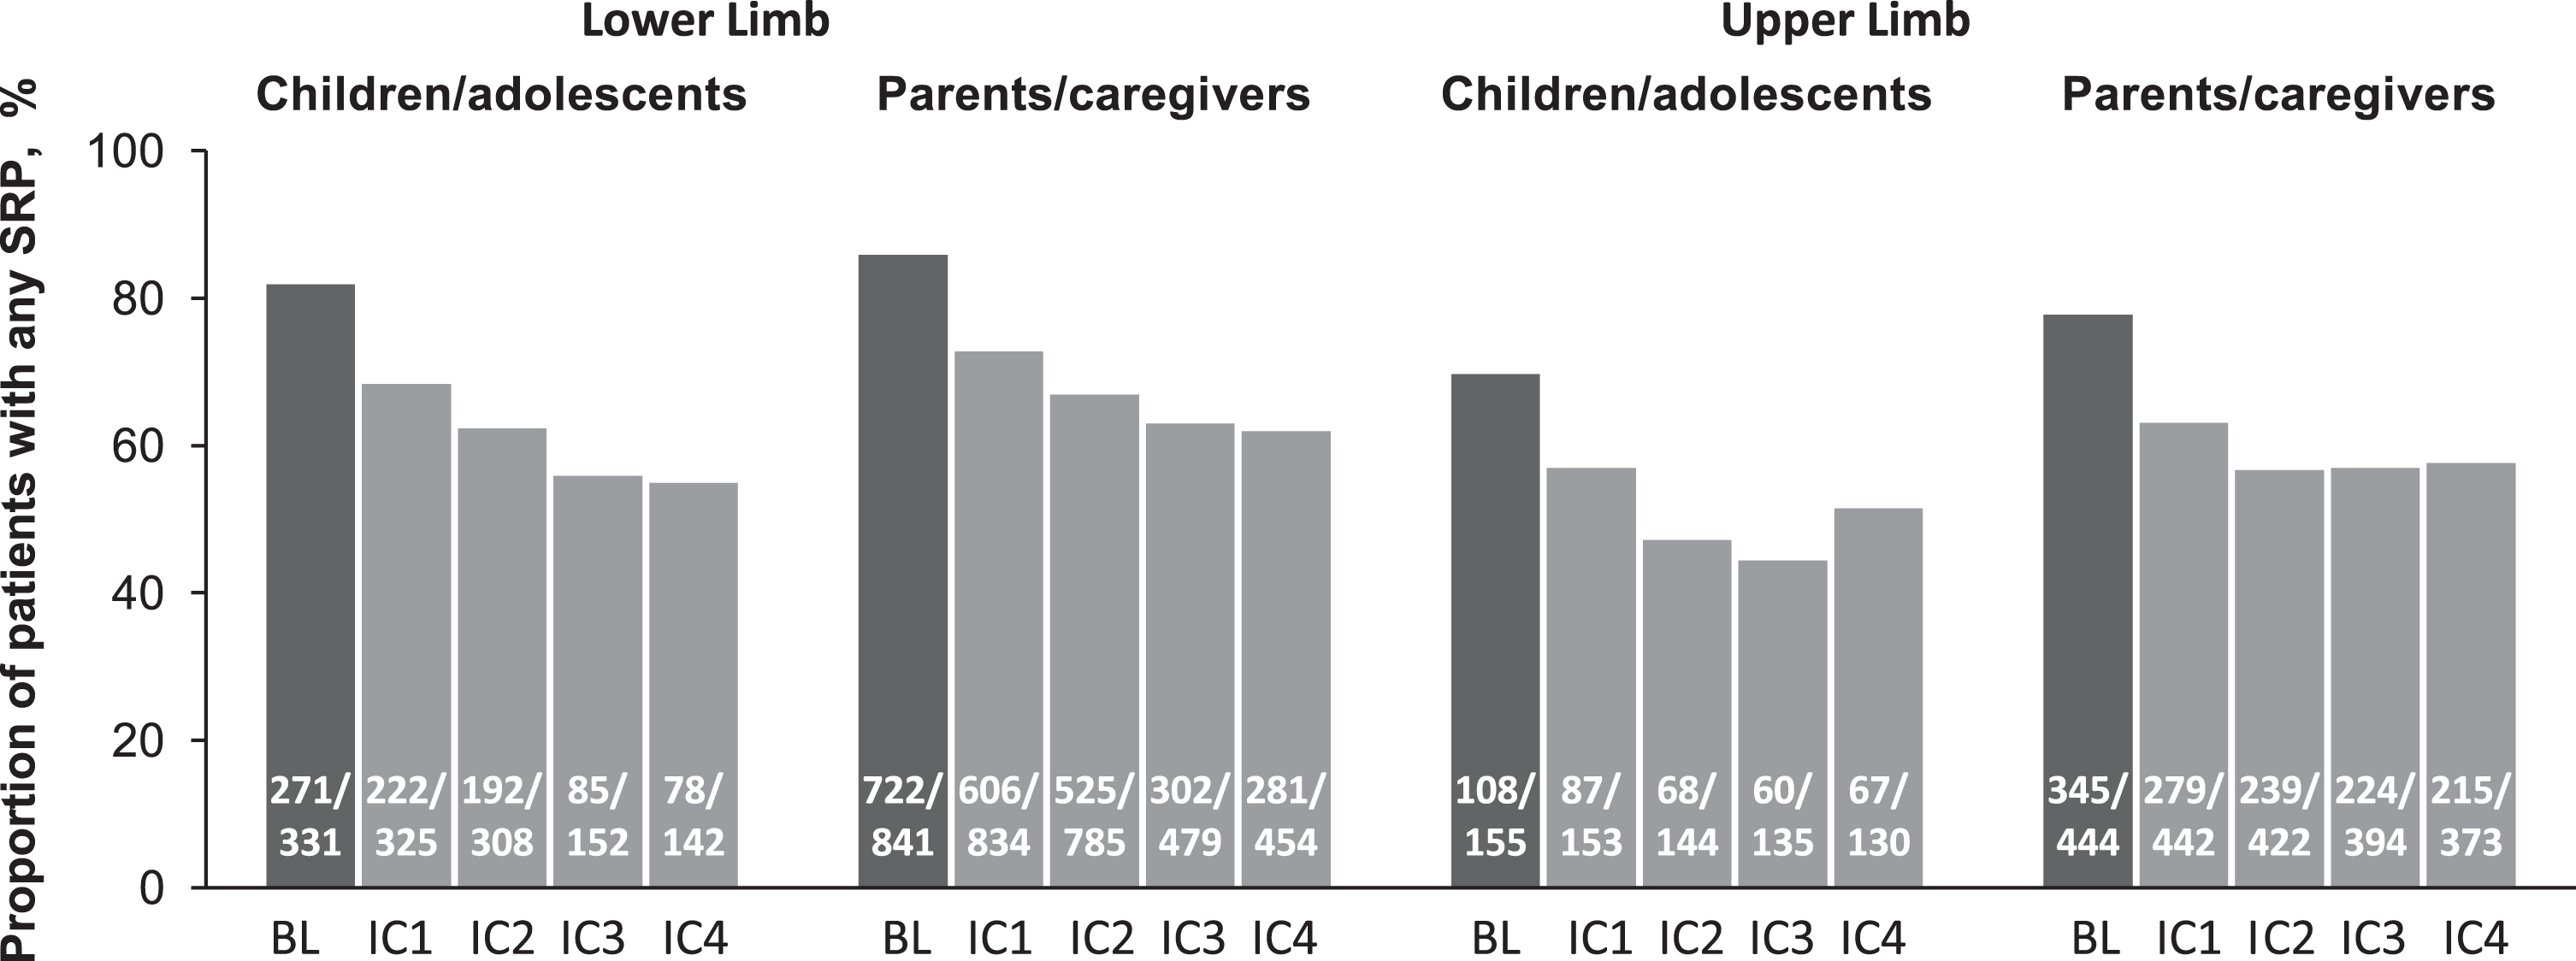 The overall proportion of children with lower limb and upper limb cerebral palsy-related spasticity reporting any SRP on any QPS key item at baseline and at Week 4 of each of four incobotulinumtoxinA injections cycles according to children/adolescents and parents/caregiversa. aThe decrease in the number of patients with LL spasticity after IC2 reflects the design and contribution to the pooled data of the TIM study, which included only two injection cycles. BL = baseline; IC = injection cycle; n/N = number of subjects reporting any SRP (on one or more of items 8, 9b, 10b, 11b, and 13b) per assessment visit/number of parent/caregiver QPS subjects evaluated for SRP per assessment visit; QPS = Questionnaire on Pain caused by Spasticity; SRP = spasticity-related pain; TIM = Treatment with IncobotulinumtoxinA in Movement.